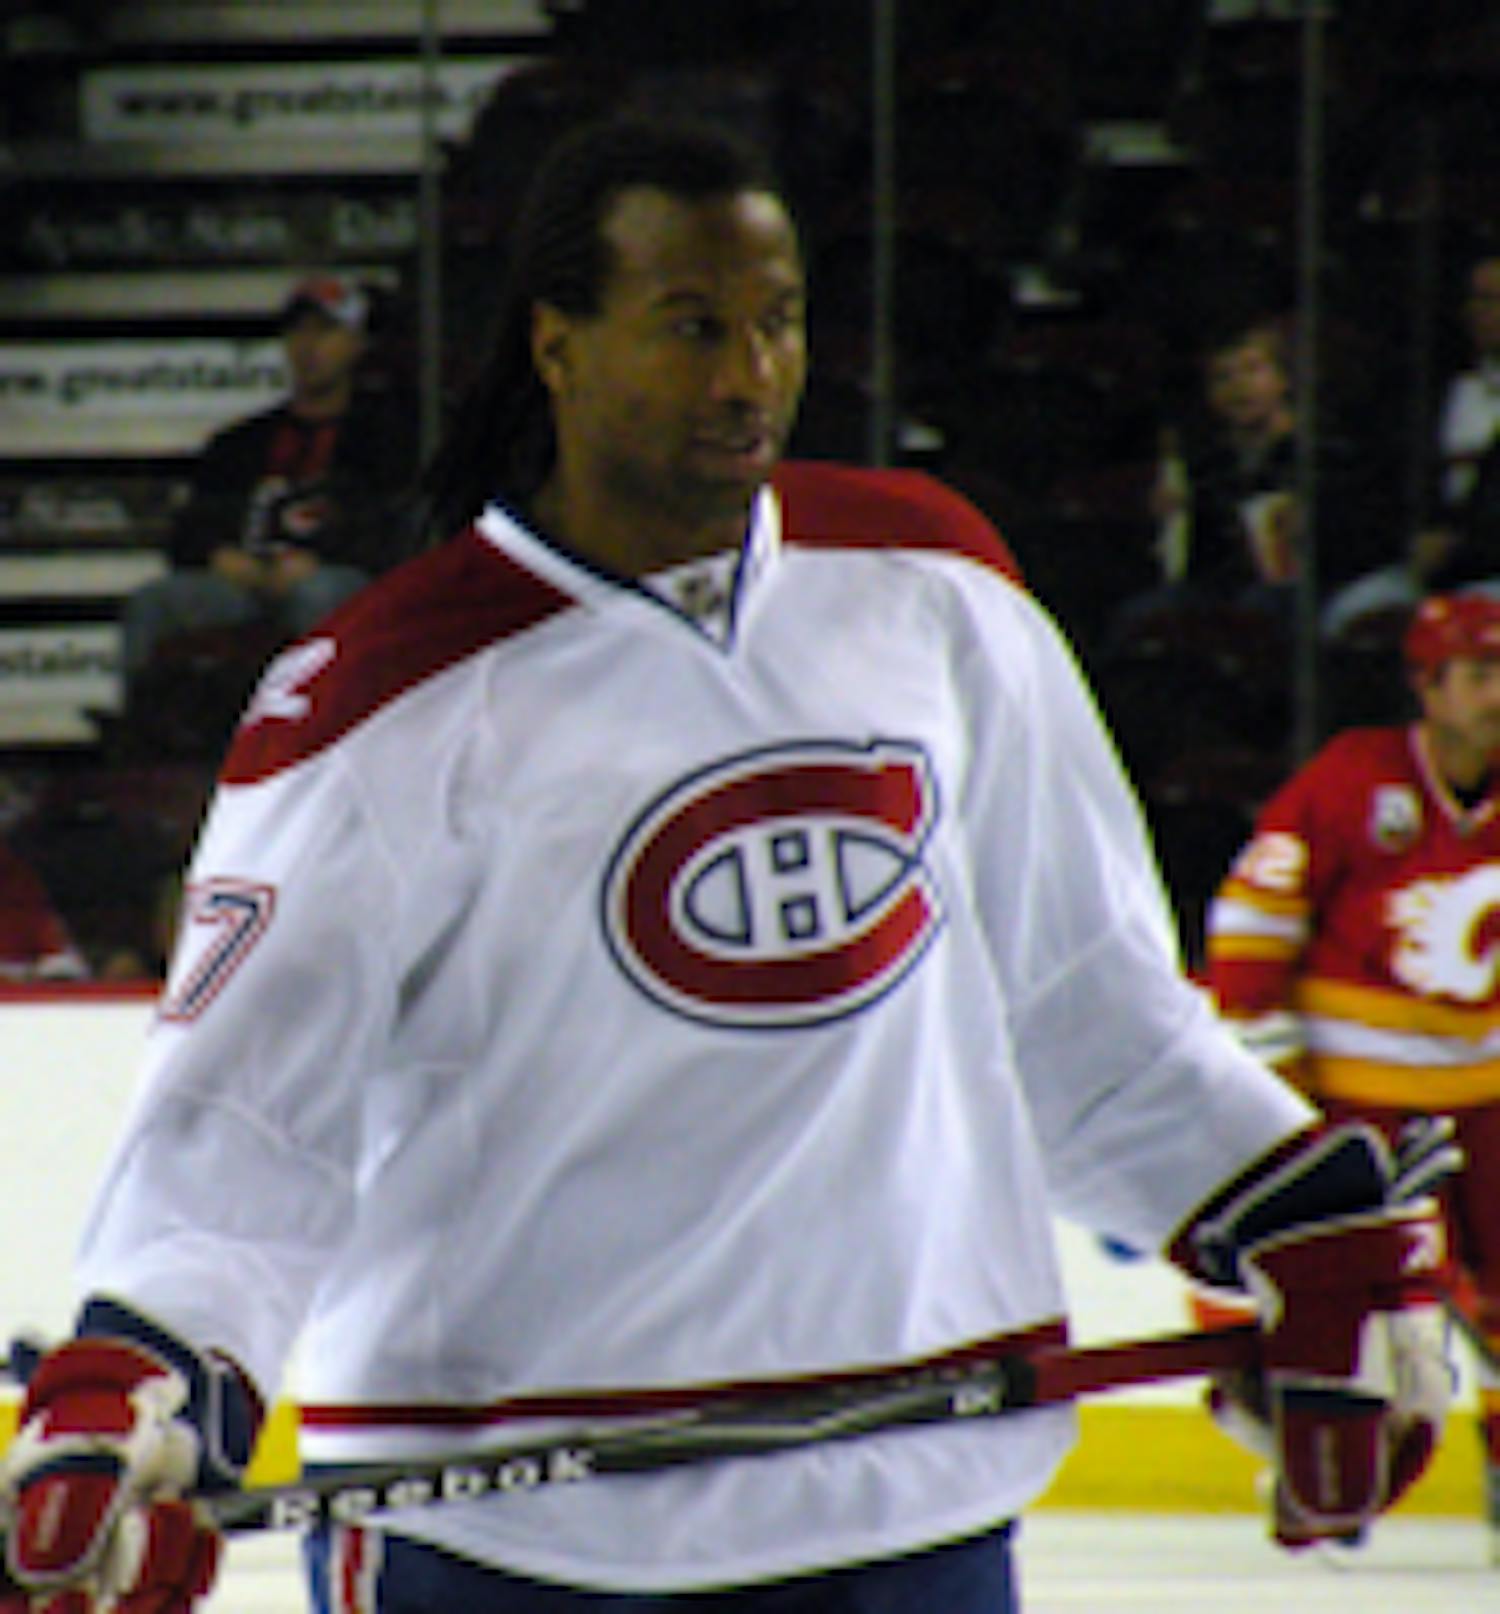 Hockey player Georges Laraque joins Green Party of Canada  